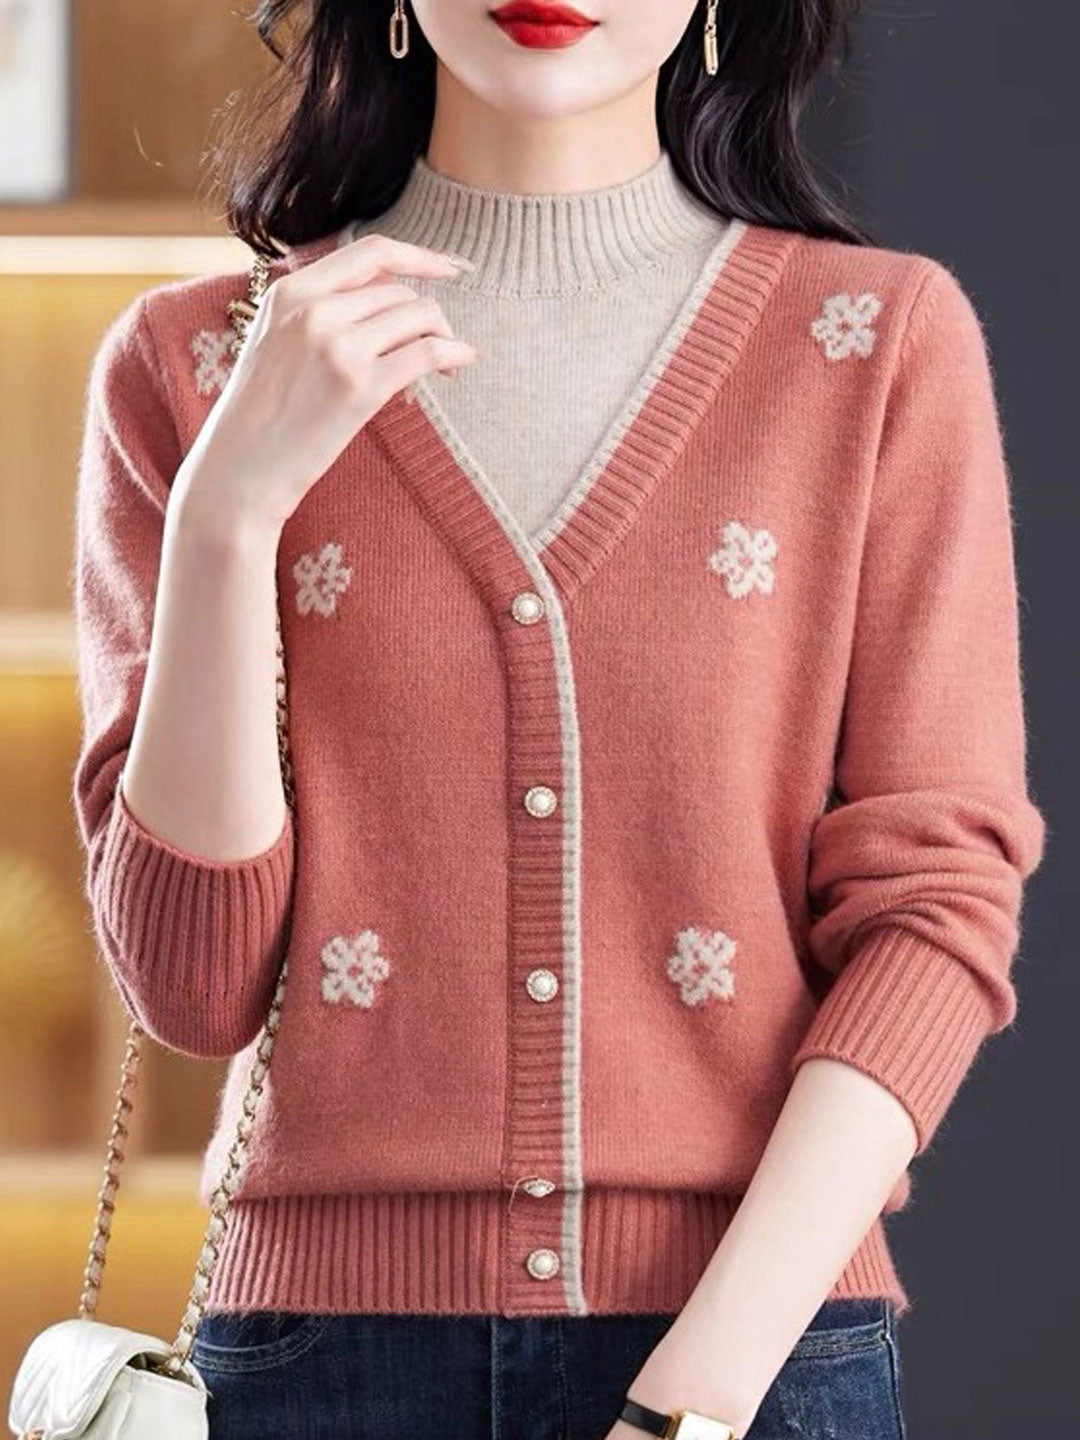 Ava Loose Contrasted Turtleneck Knitted Sweater